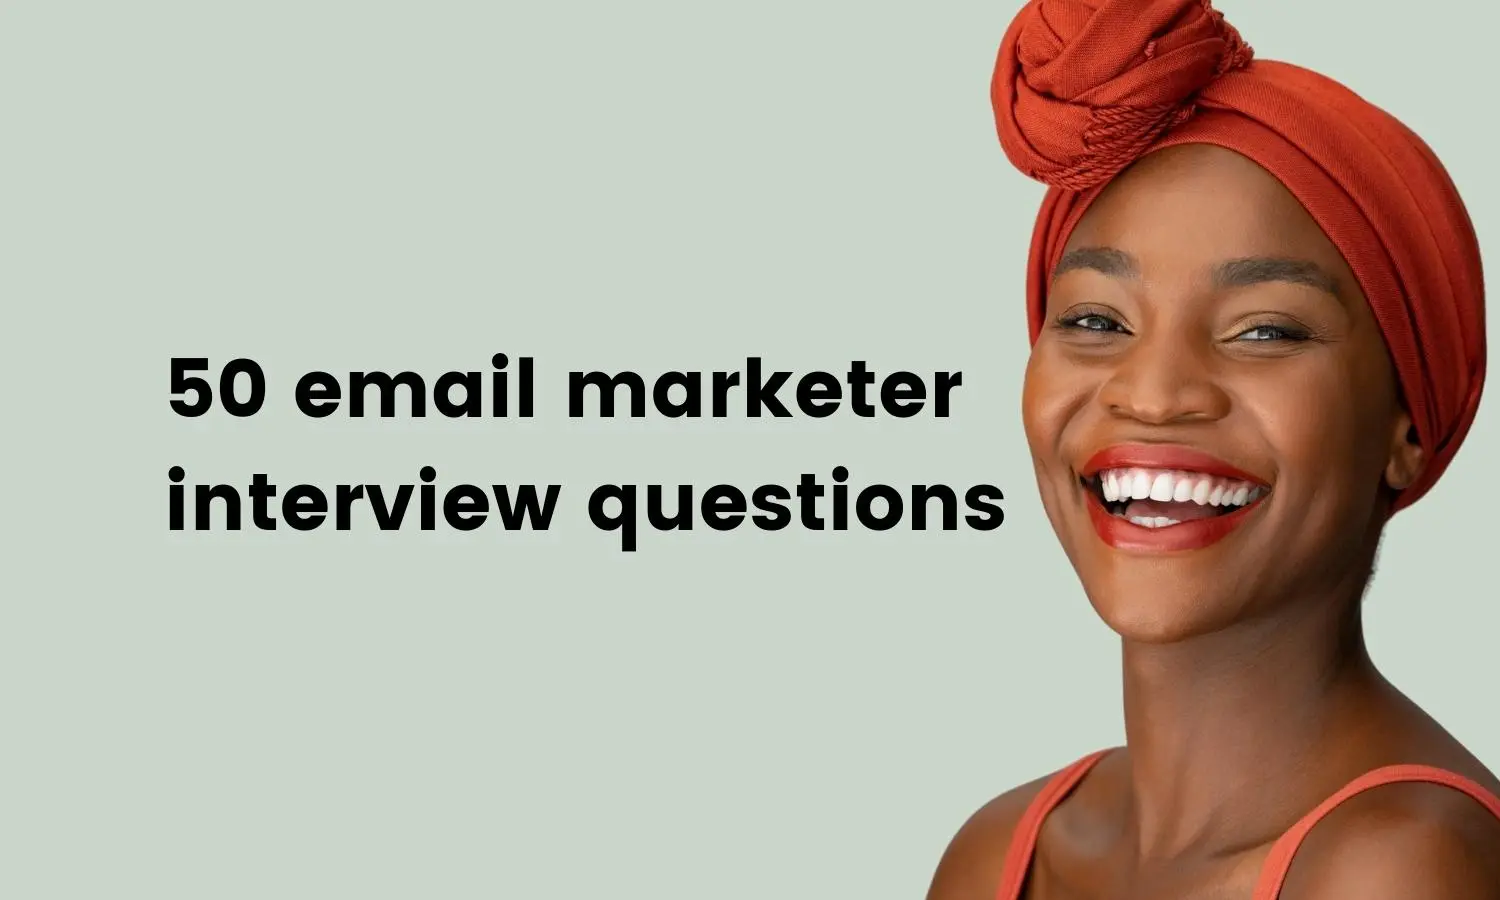 50_email_marketer_interview_questions